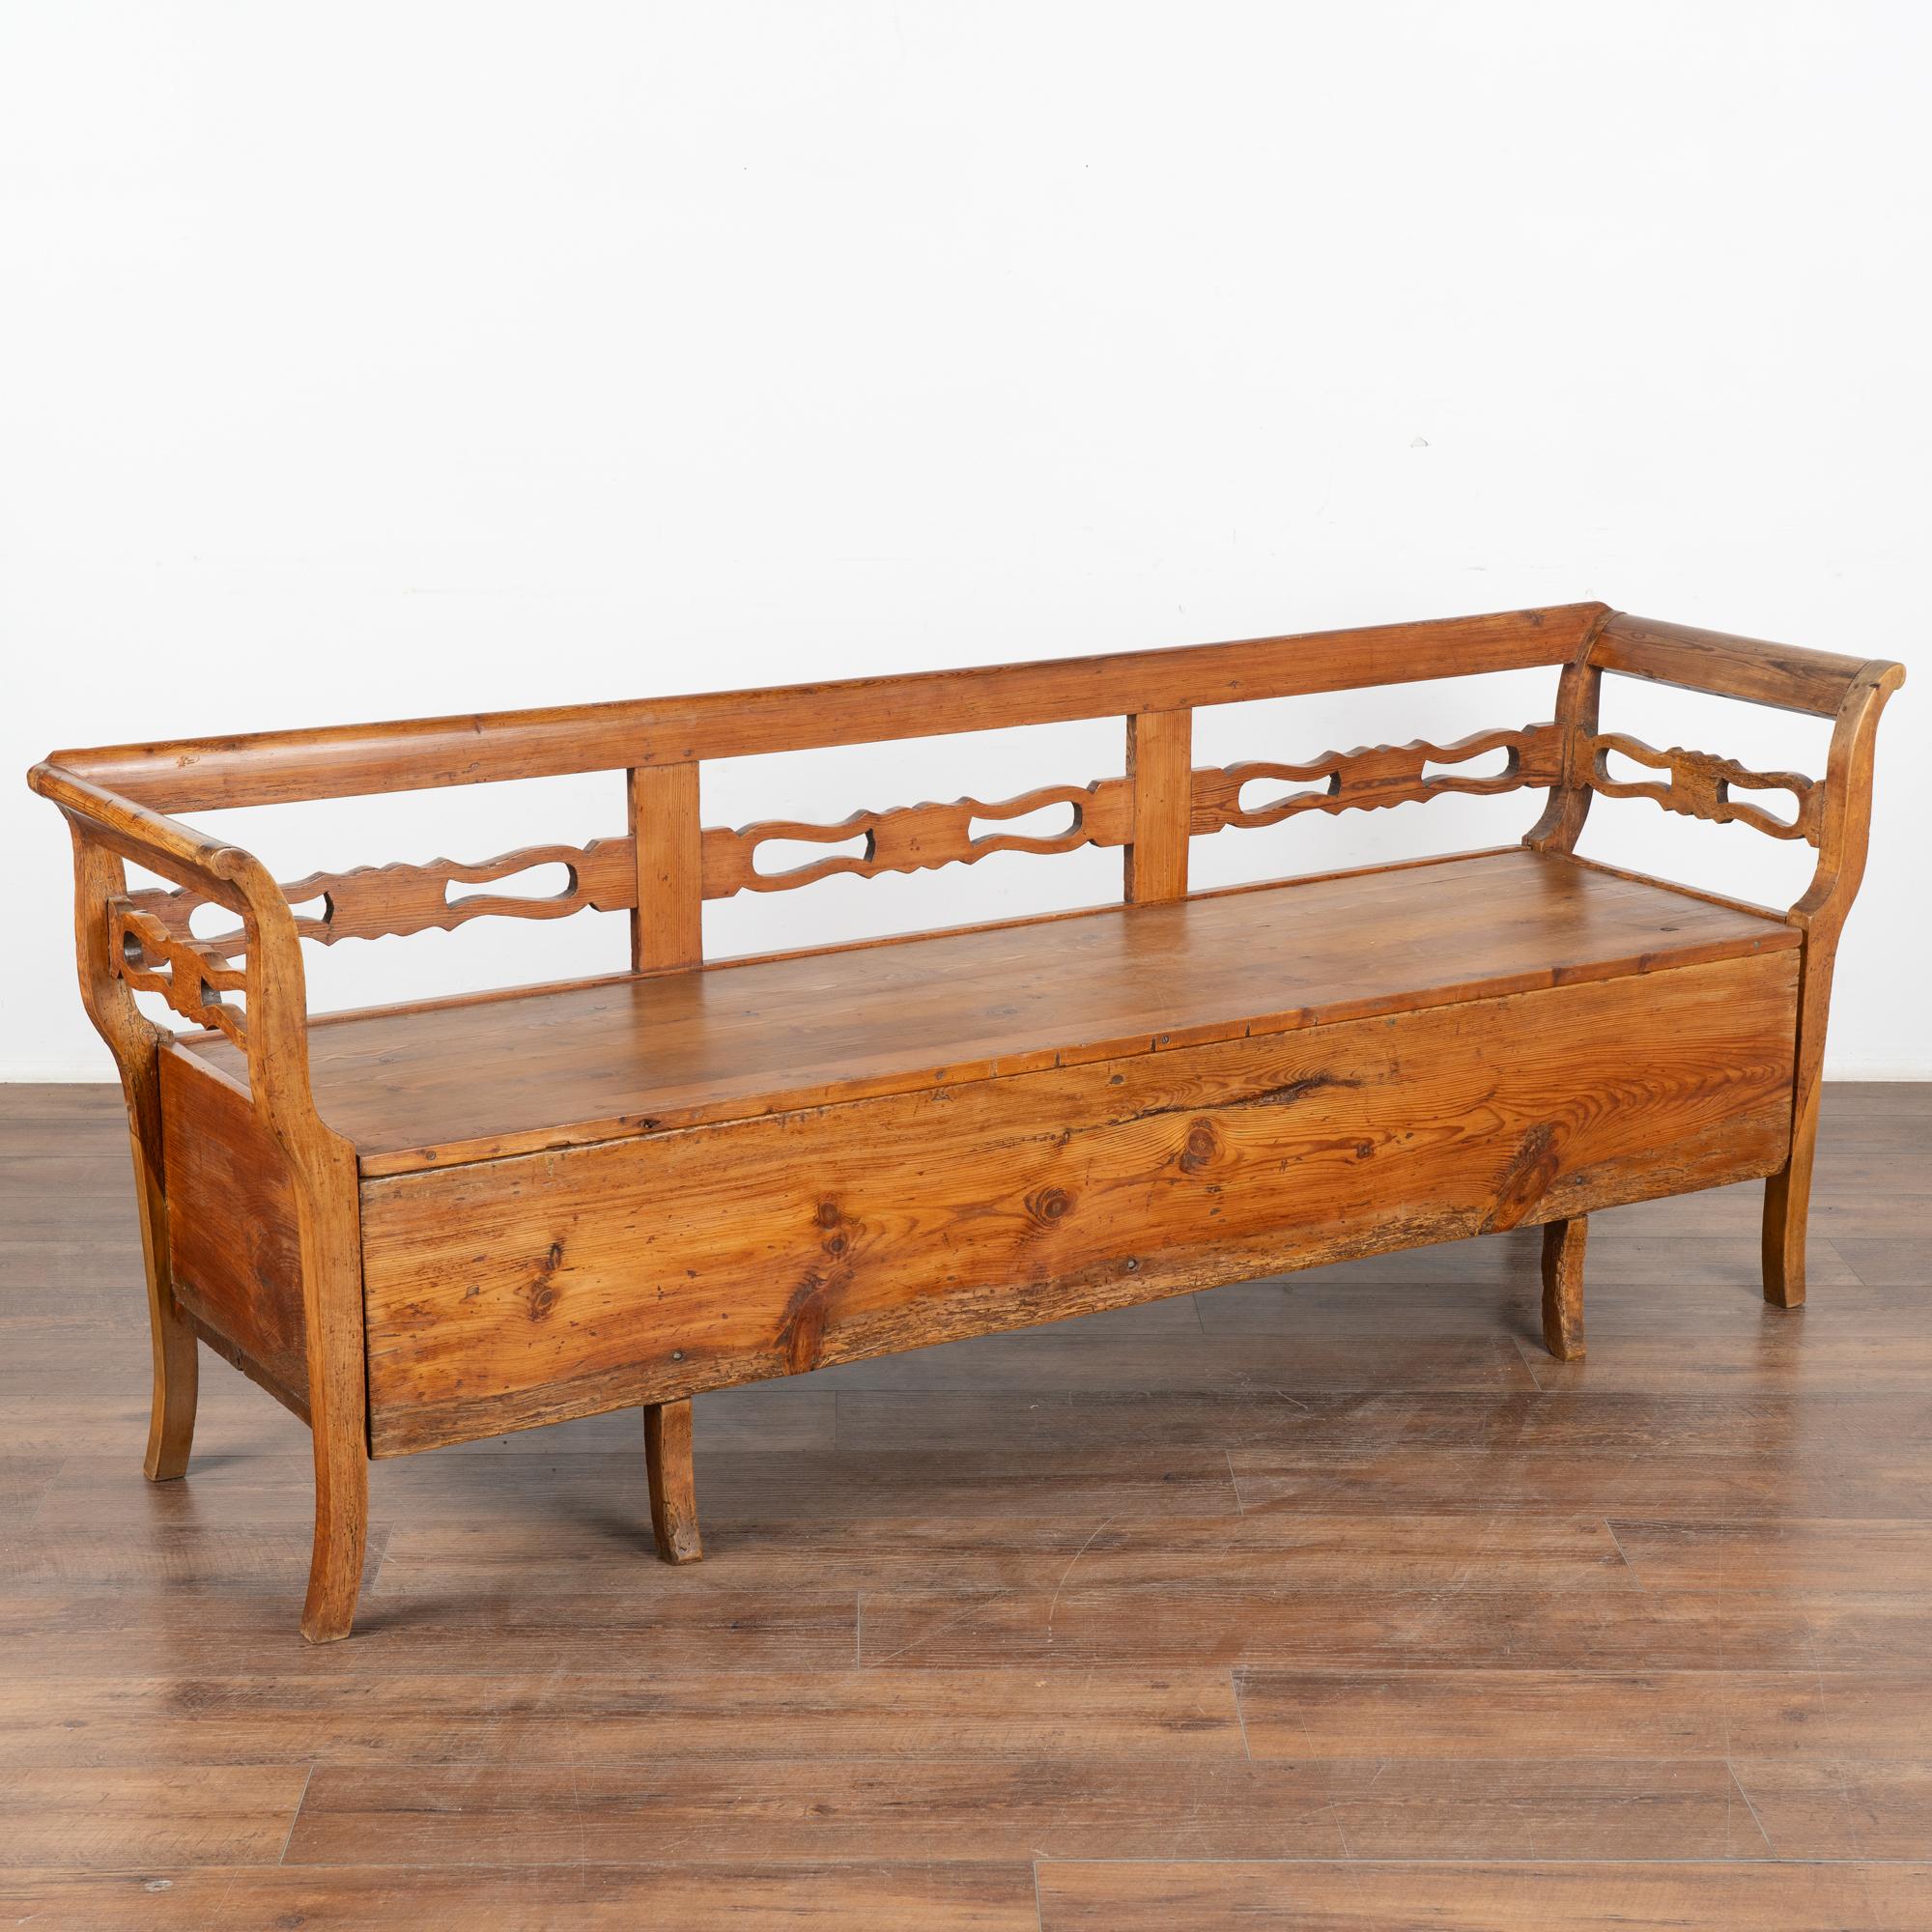 The years of use have deepened the warm patina of the pine, aging gracefully through the years. The decorative carving along the back and arms add to its appeal.
Notice the seat is hinged, creating great storage space for items that need to be